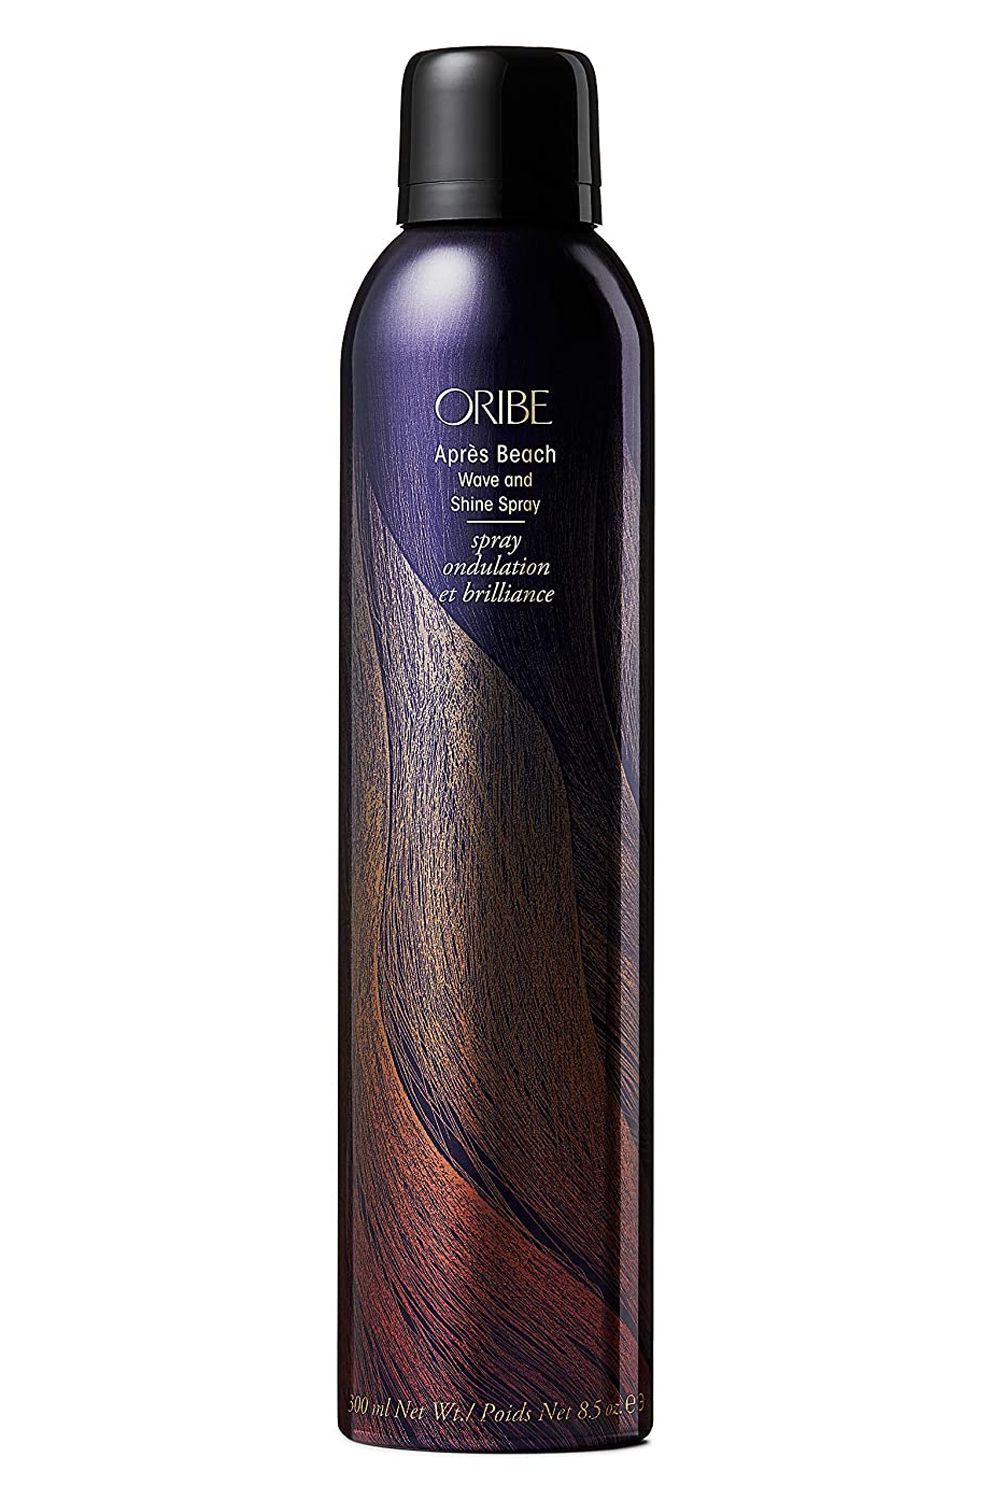 15 Best Oribe Hair Products of All Time, Tested and Reviewed